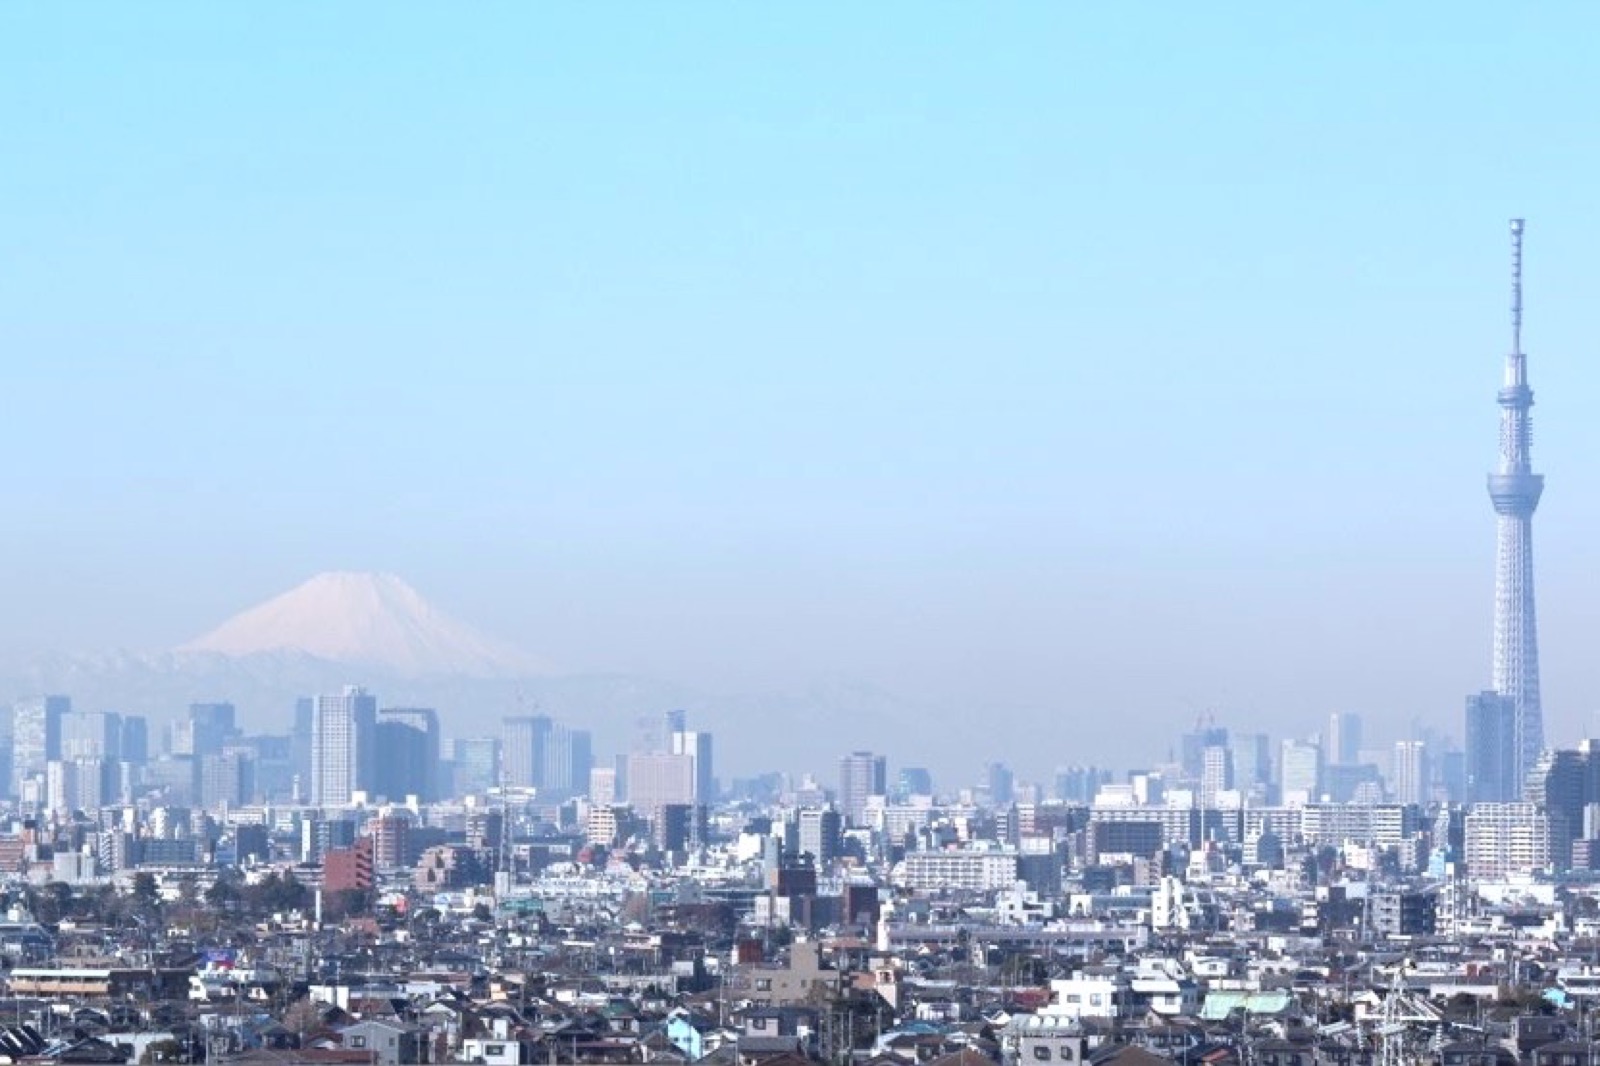 Photo of Tokyo Skytree, Japan (Mt.Fuji & Tokyo SkyTree - viewed from a building in Ichikawa, Chiba (most likely, close but not from I-link town Ichikawa) 千葉県市川市、I-linkタウンいちかわ展望施設より、東京スカイツリーと富士山を望む。 by Atomark)